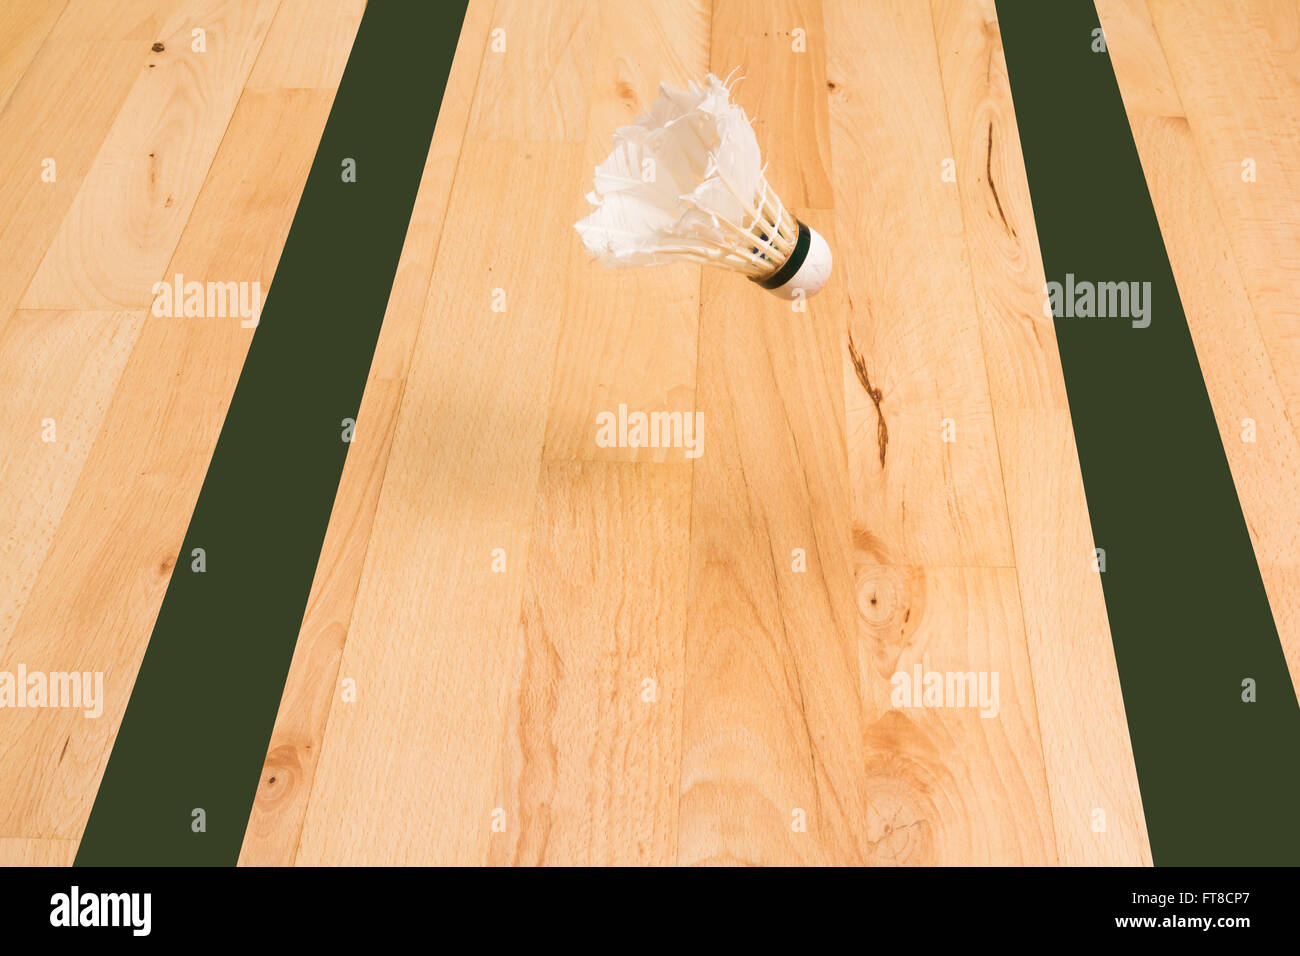 Mislukking Nauwkeurigheid Koning Lear shuttlecock about to land between the two outer green lines of a badminton  court Stock Photo - Alamy